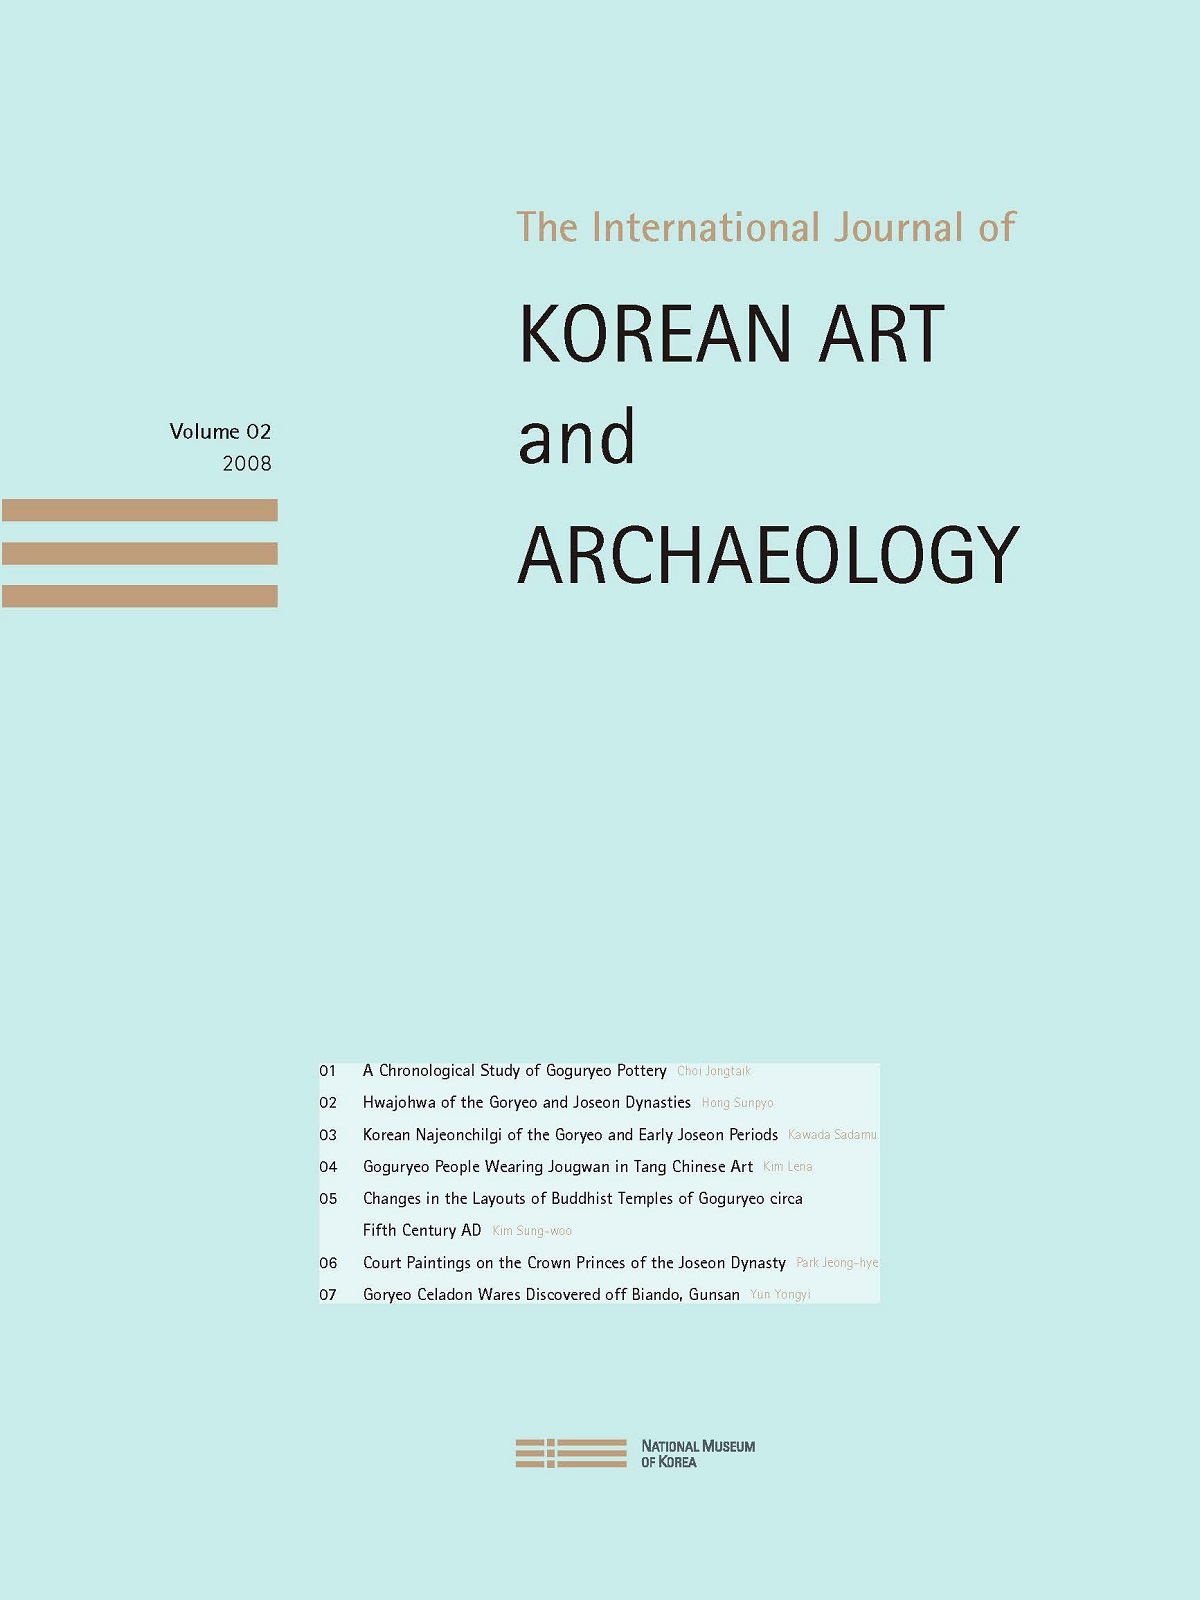 The Journal of Korean Art and Archaeology